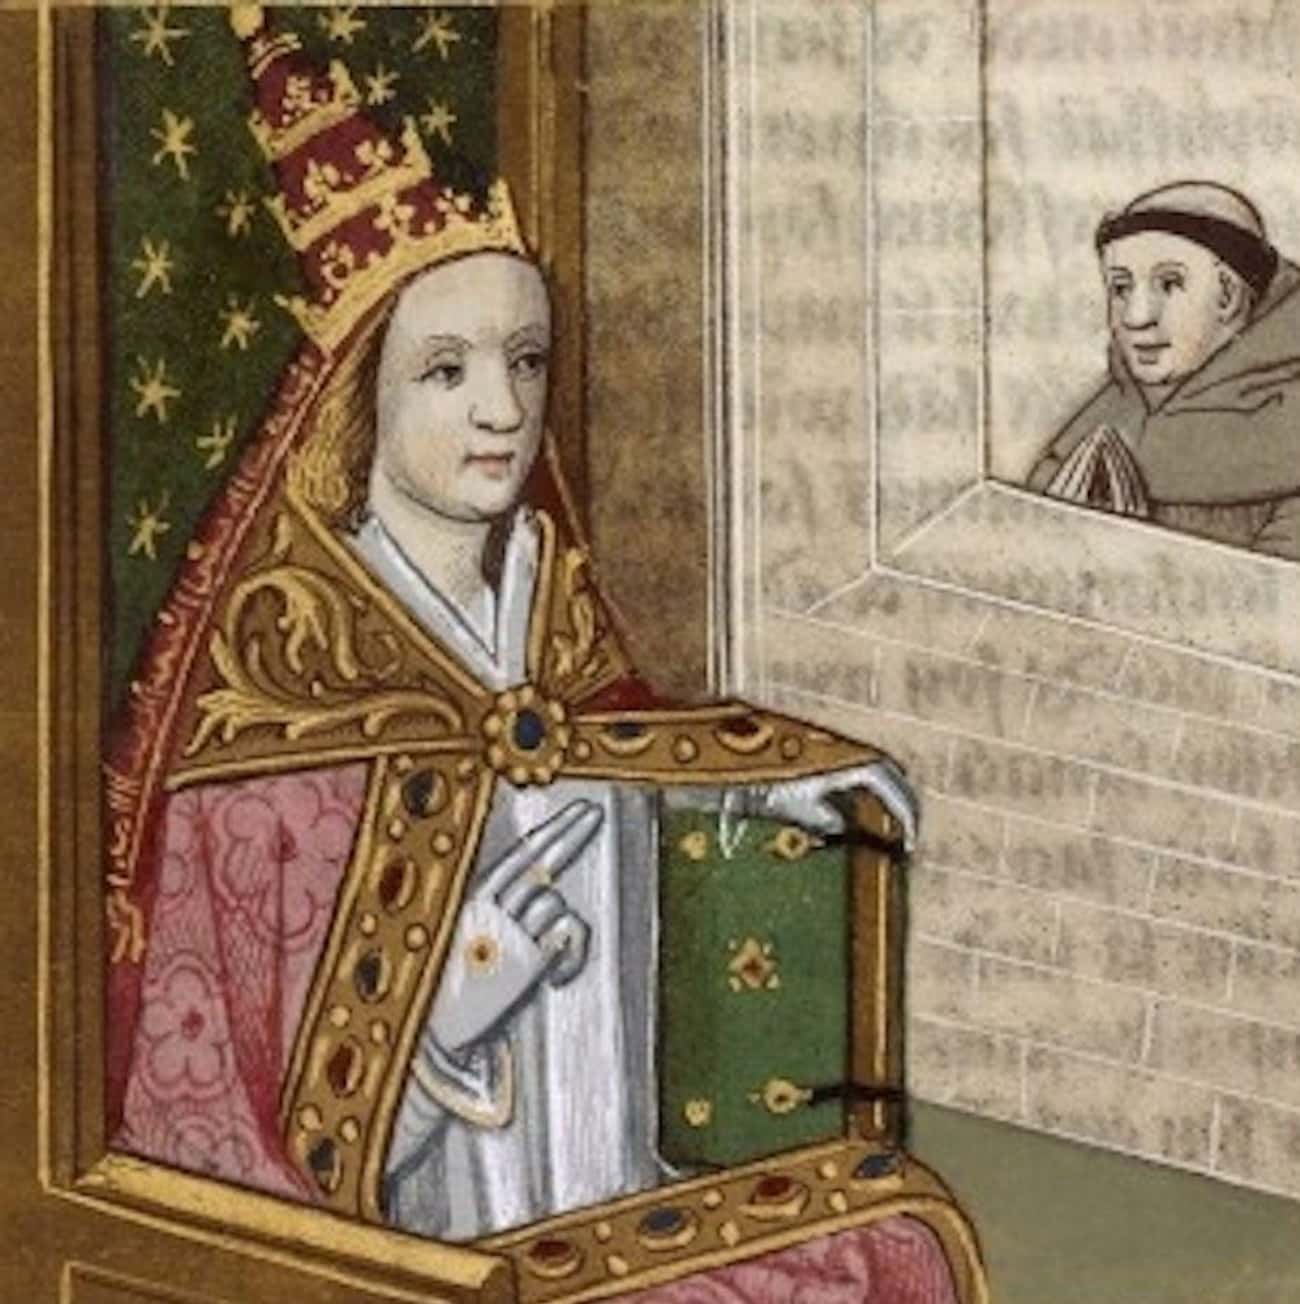 Pope Joan Likely Pretended To Be A Man To Obtain An Education